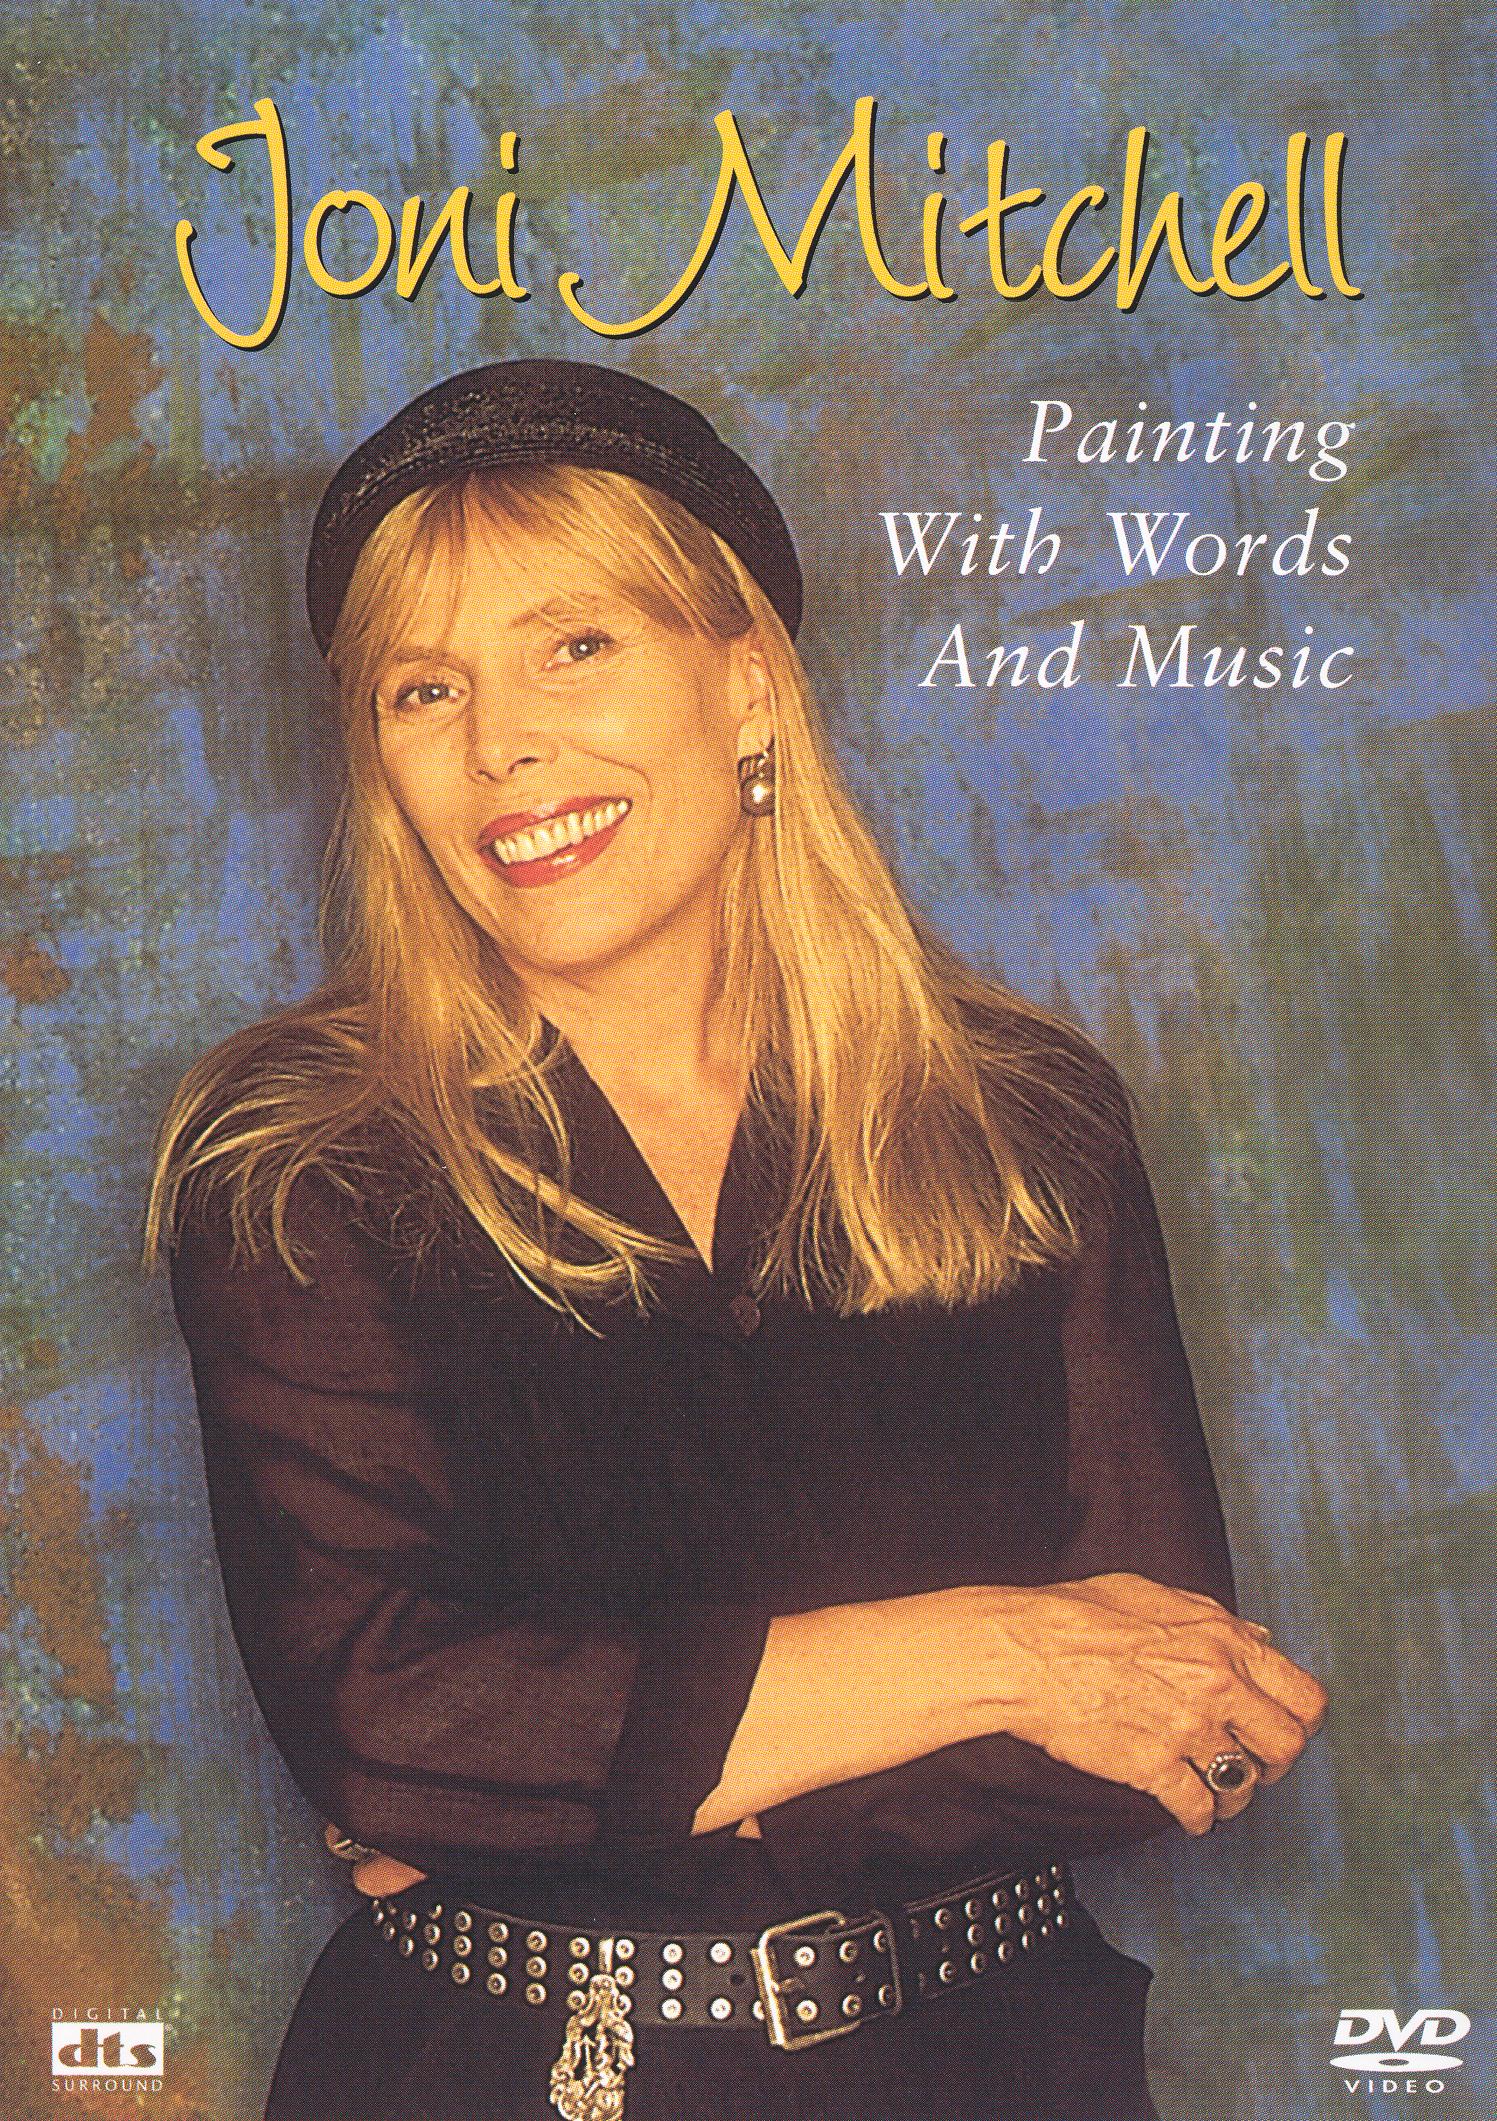 Joni Mitchell: Painting With Words and Music DVD 1998 - Best Buy.